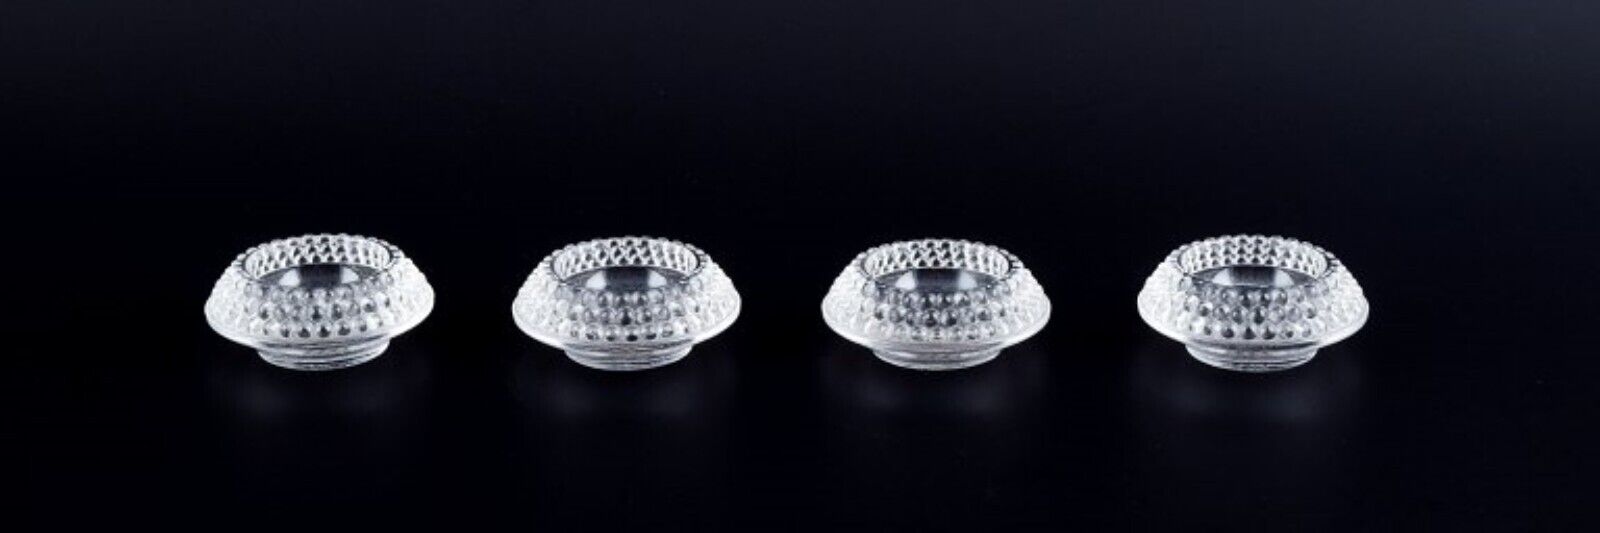 René Lalique set of four early and rare "Nippon" salt cellars in art glass